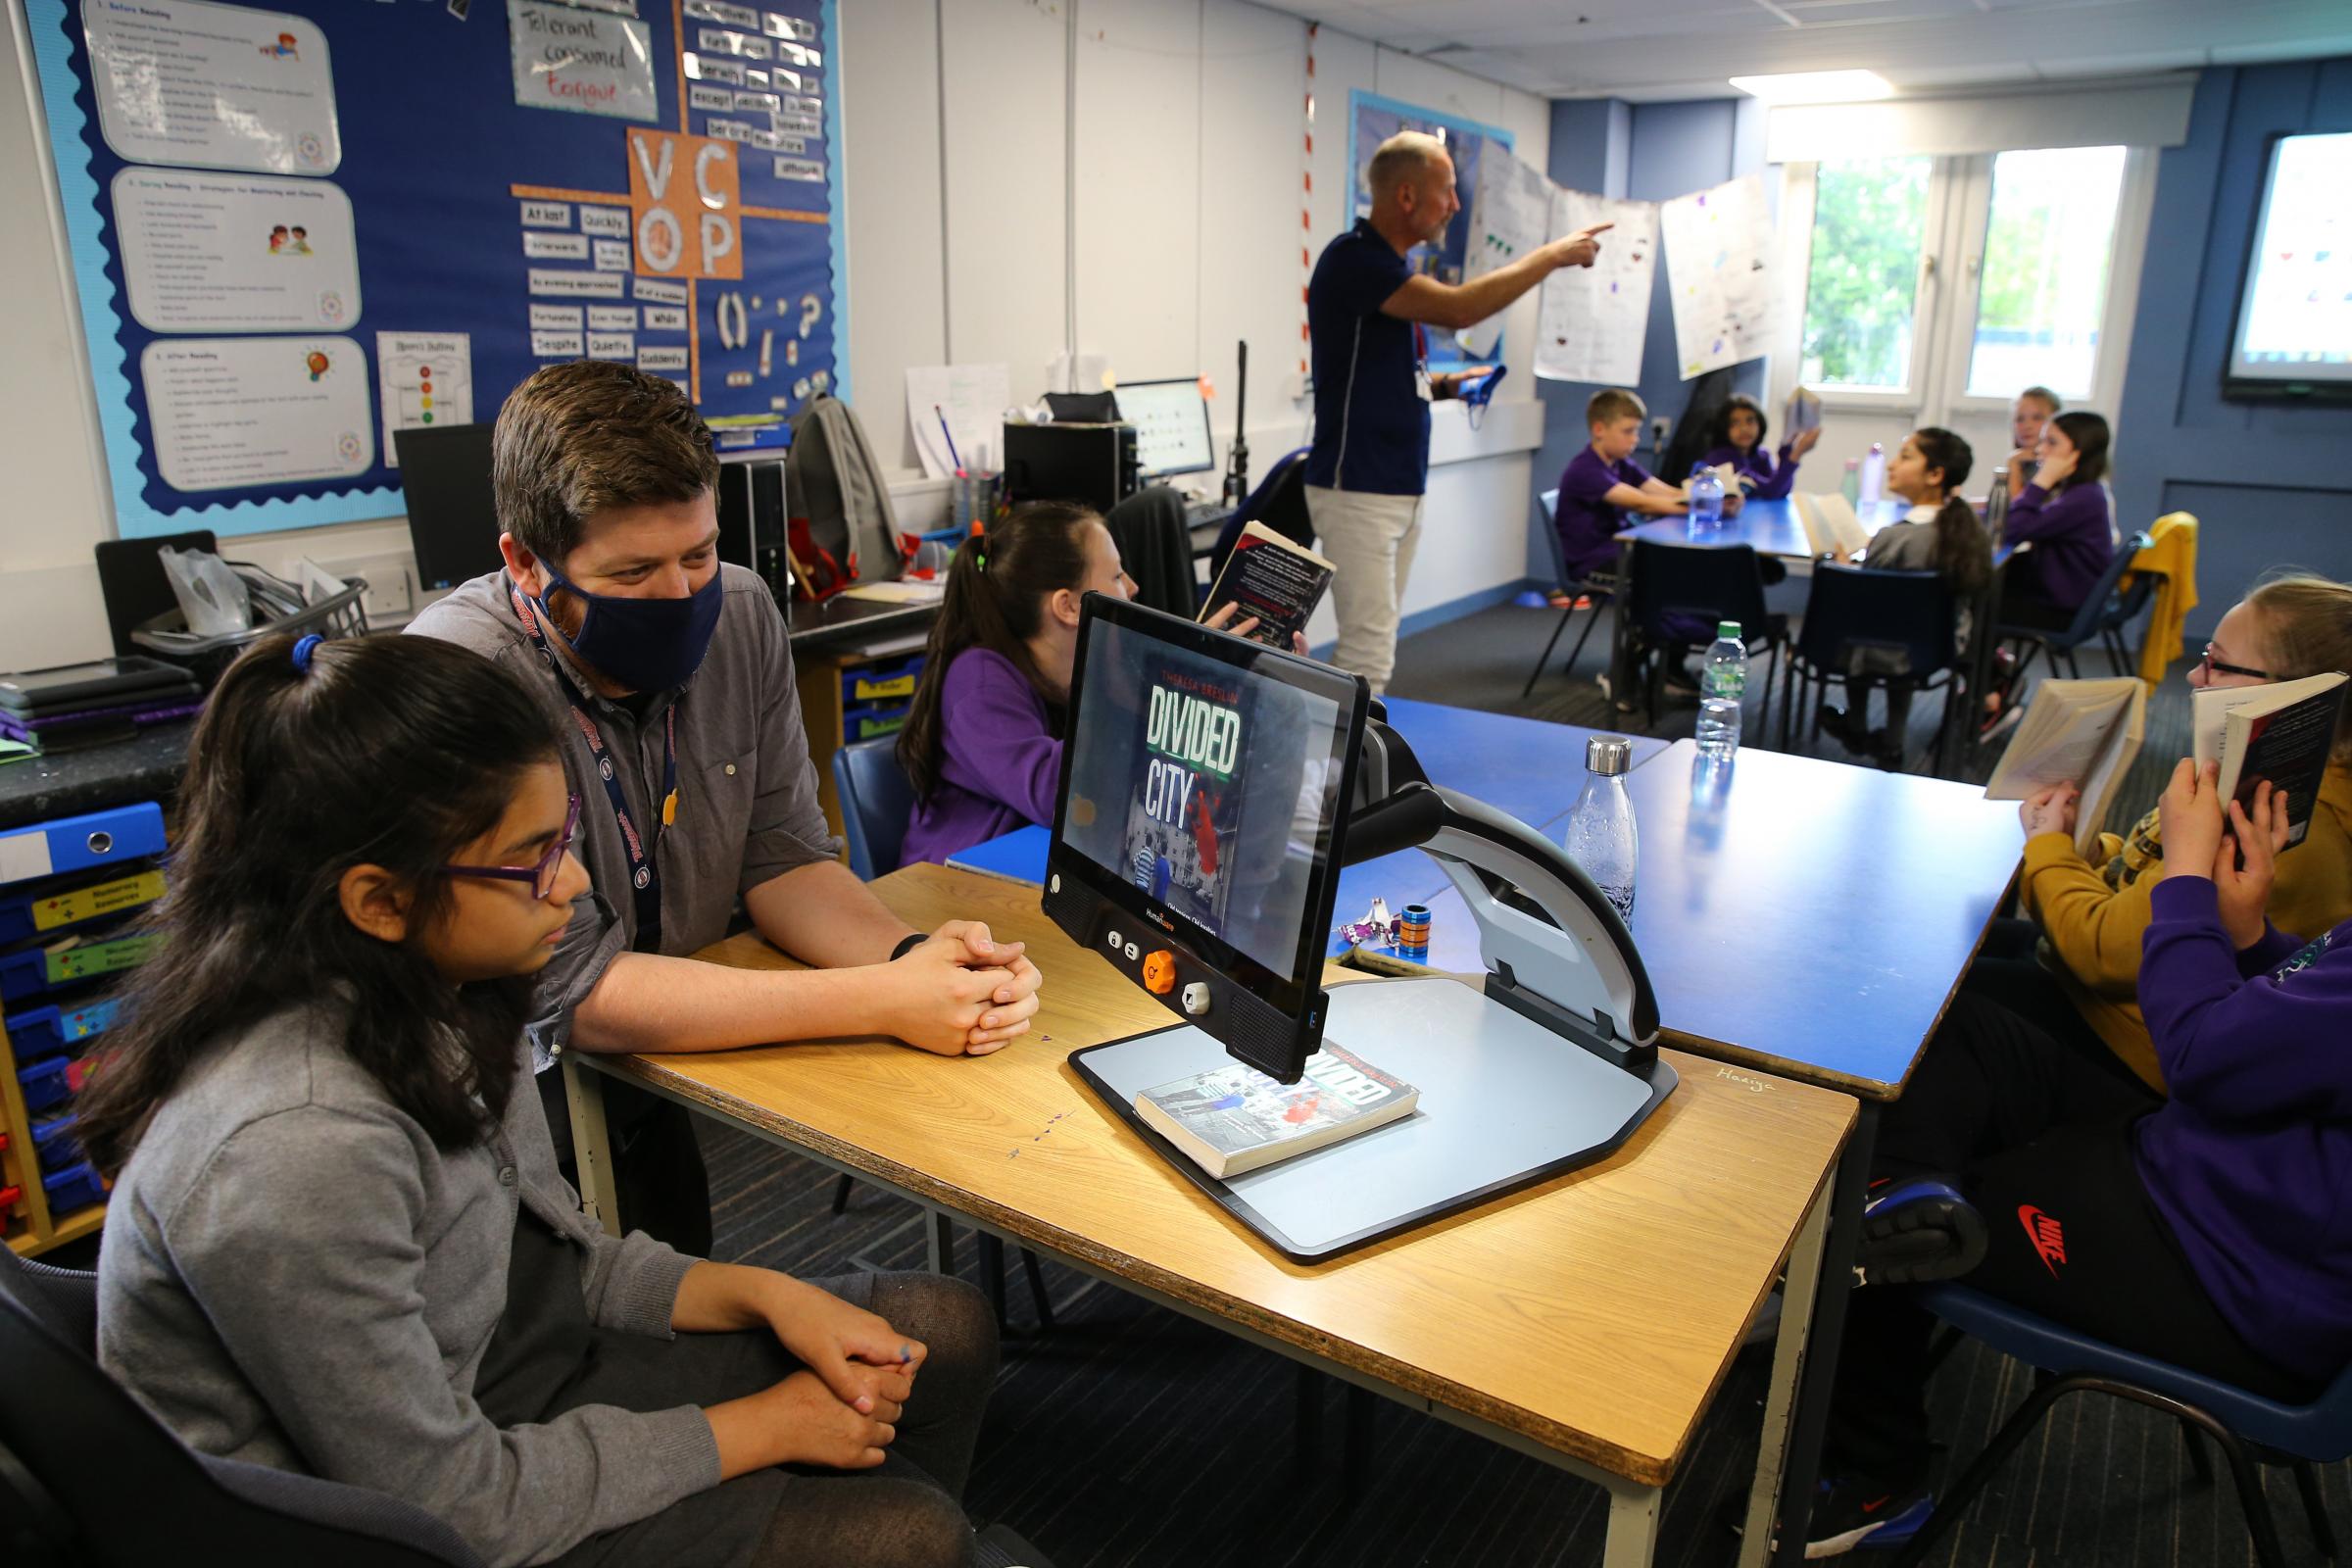 Mark Adams (middle of frame) project co-ordinator with Sense Over Sectarianism pictured speaking to Darnley Primary school P6 pupils. In foreground left is class teacher Martin Walker with Haniya Akhter age 11 Picture: Colin Mearns